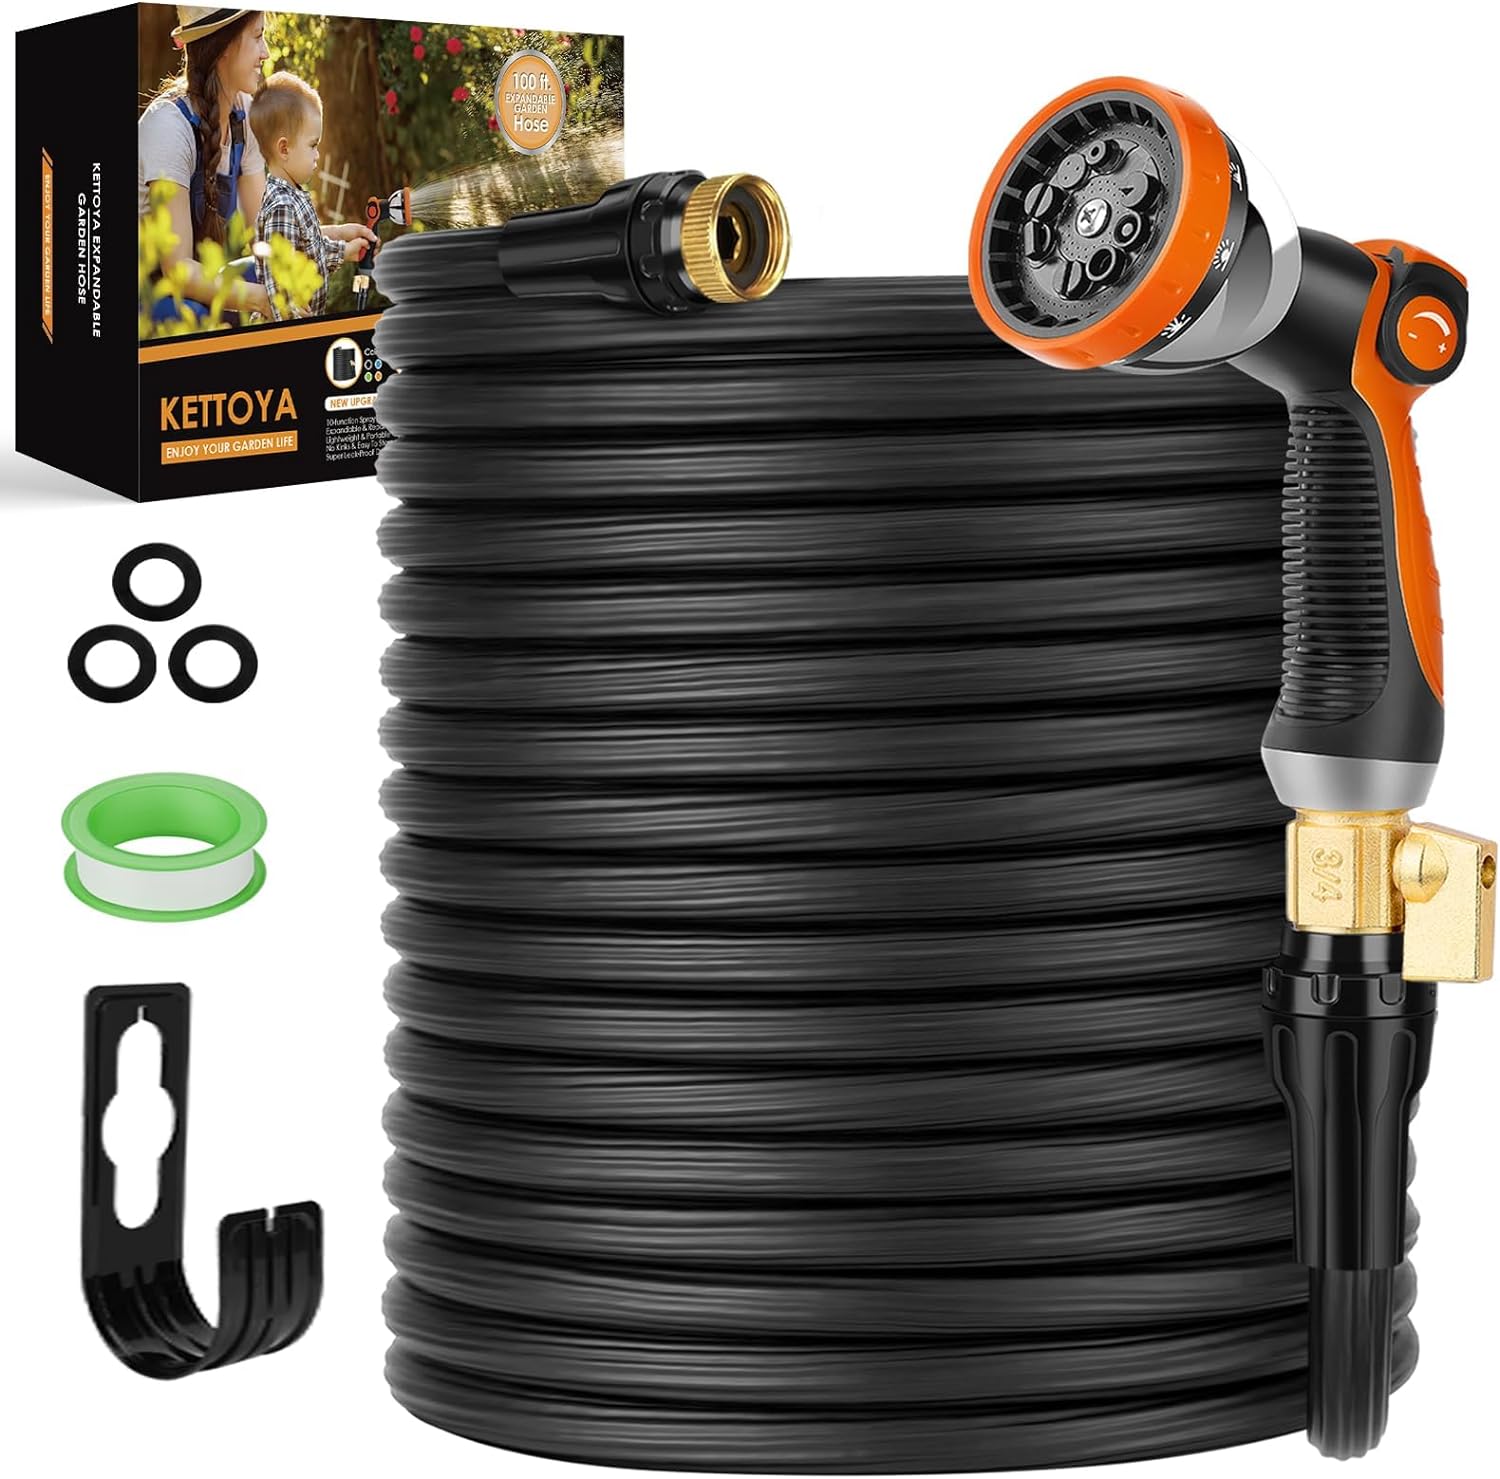 ($60 on amazon w/ 1,000+ 5-stars - see additional image) - Lightweight Expandable Garden Hose WITH Deluxe Thumb Control Multi-Pattern Spray Nozzle AND Hanging Bracket! - No-Kink Flexibility, 3/4 Inch Solid Brass Fittings and Double Latex Core - GREAT DEAL because you will receive green, black or blue at random - Order 2 or more and SHIPPING IS FREE!